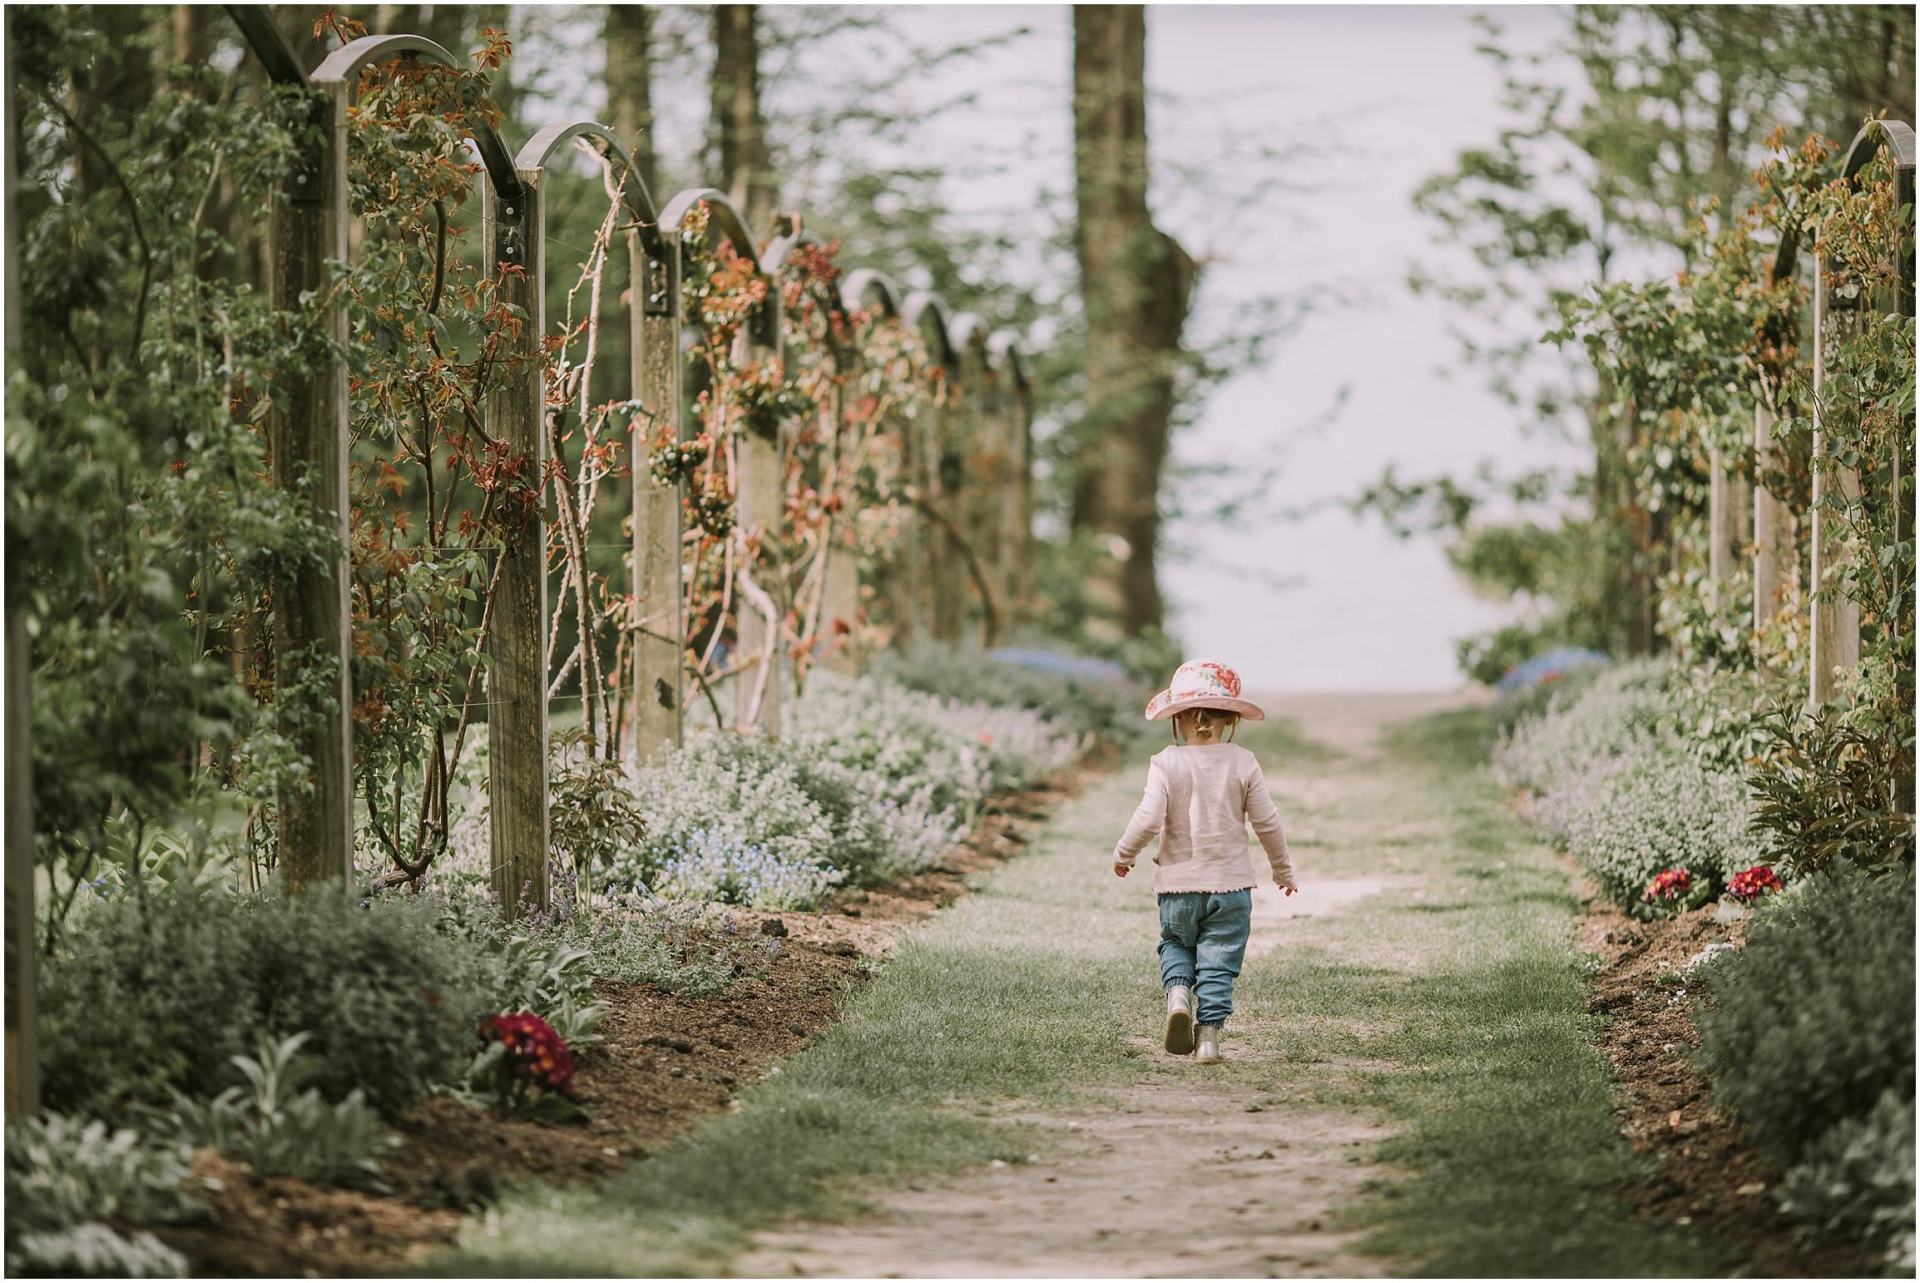 Charlotte Kiri Photography - Family Photography of a young girl who is wearing a sunhat and walking amongst the vines in Wanaka, New Zealand.